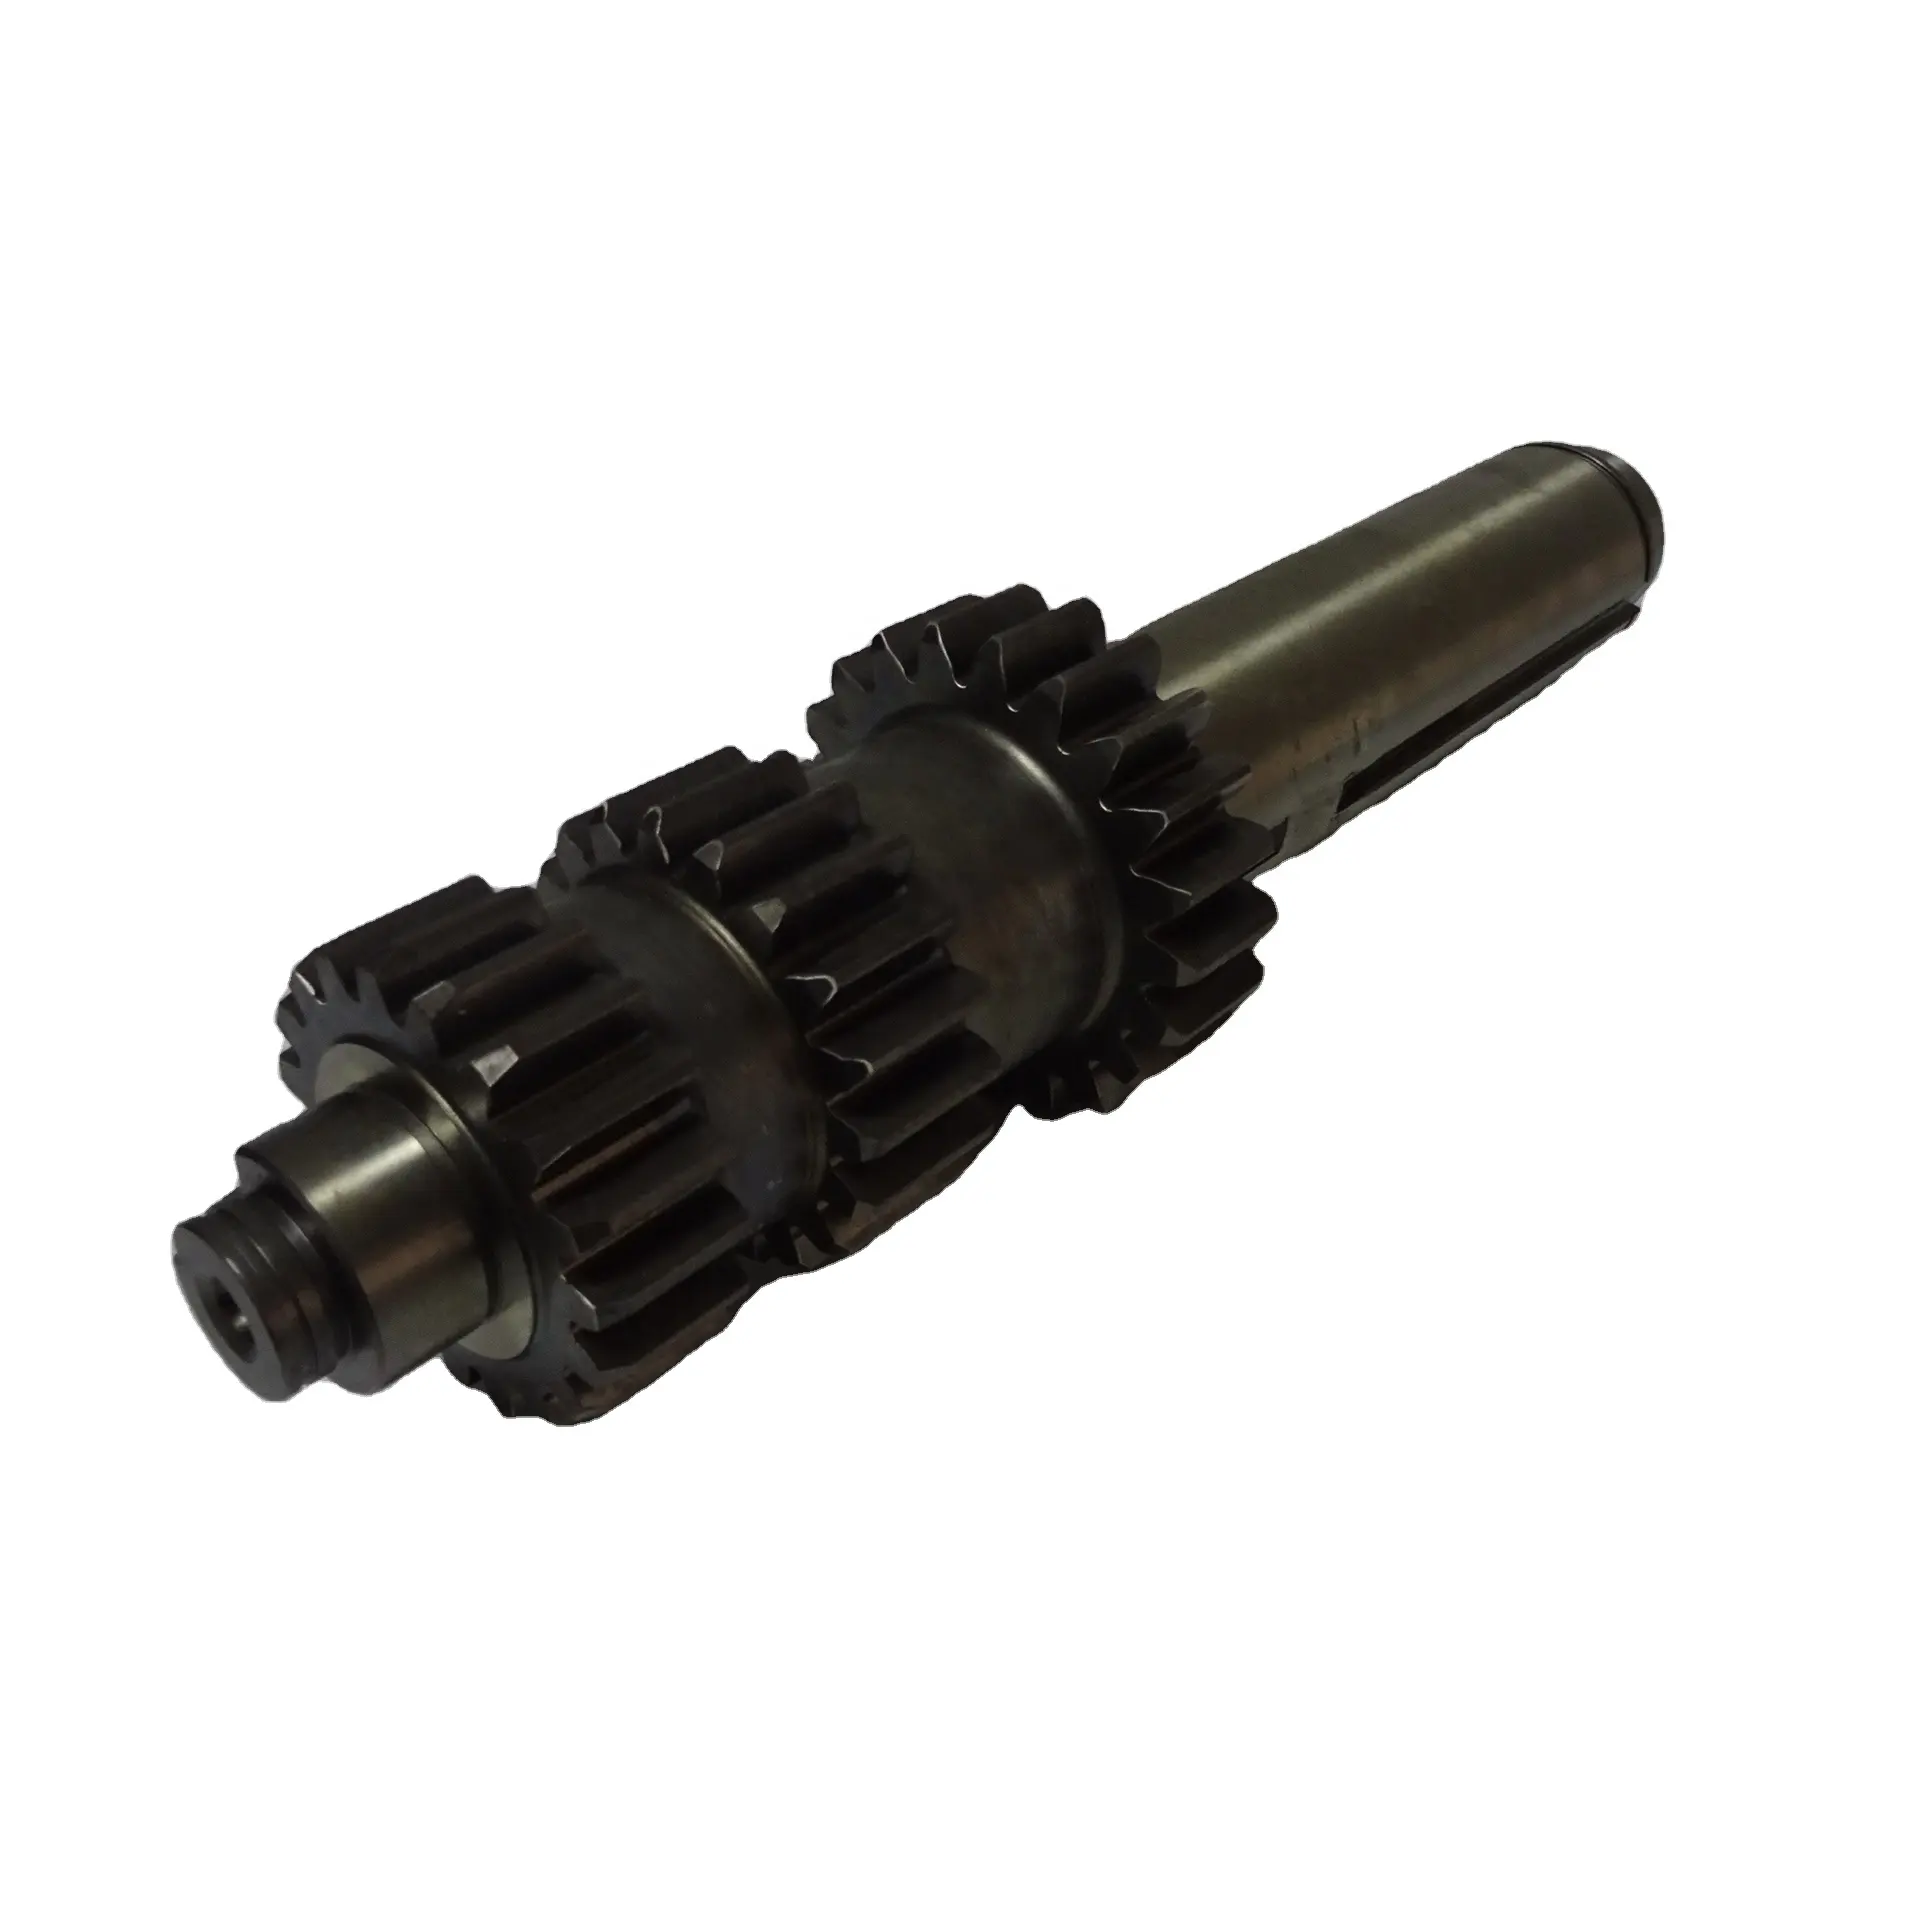 The high quality drive shaft assy for gearbox